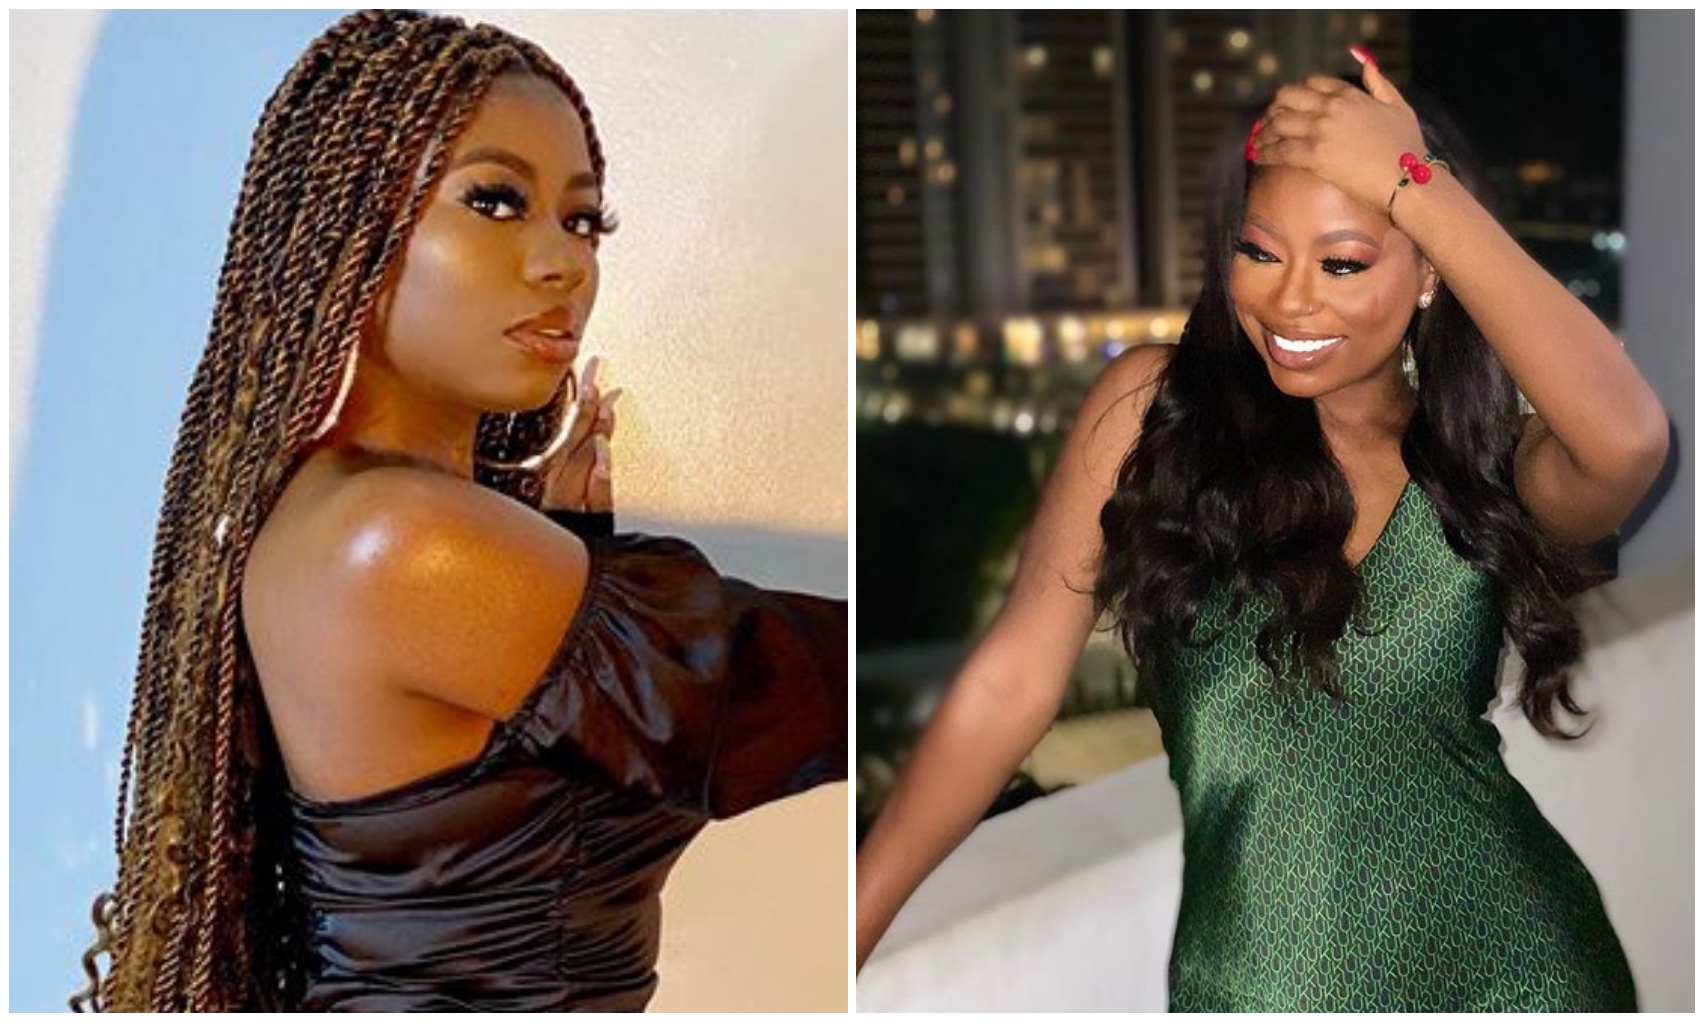 'A dime in her city' – Sophia Momodu glows in colourful green outfit (Photos)